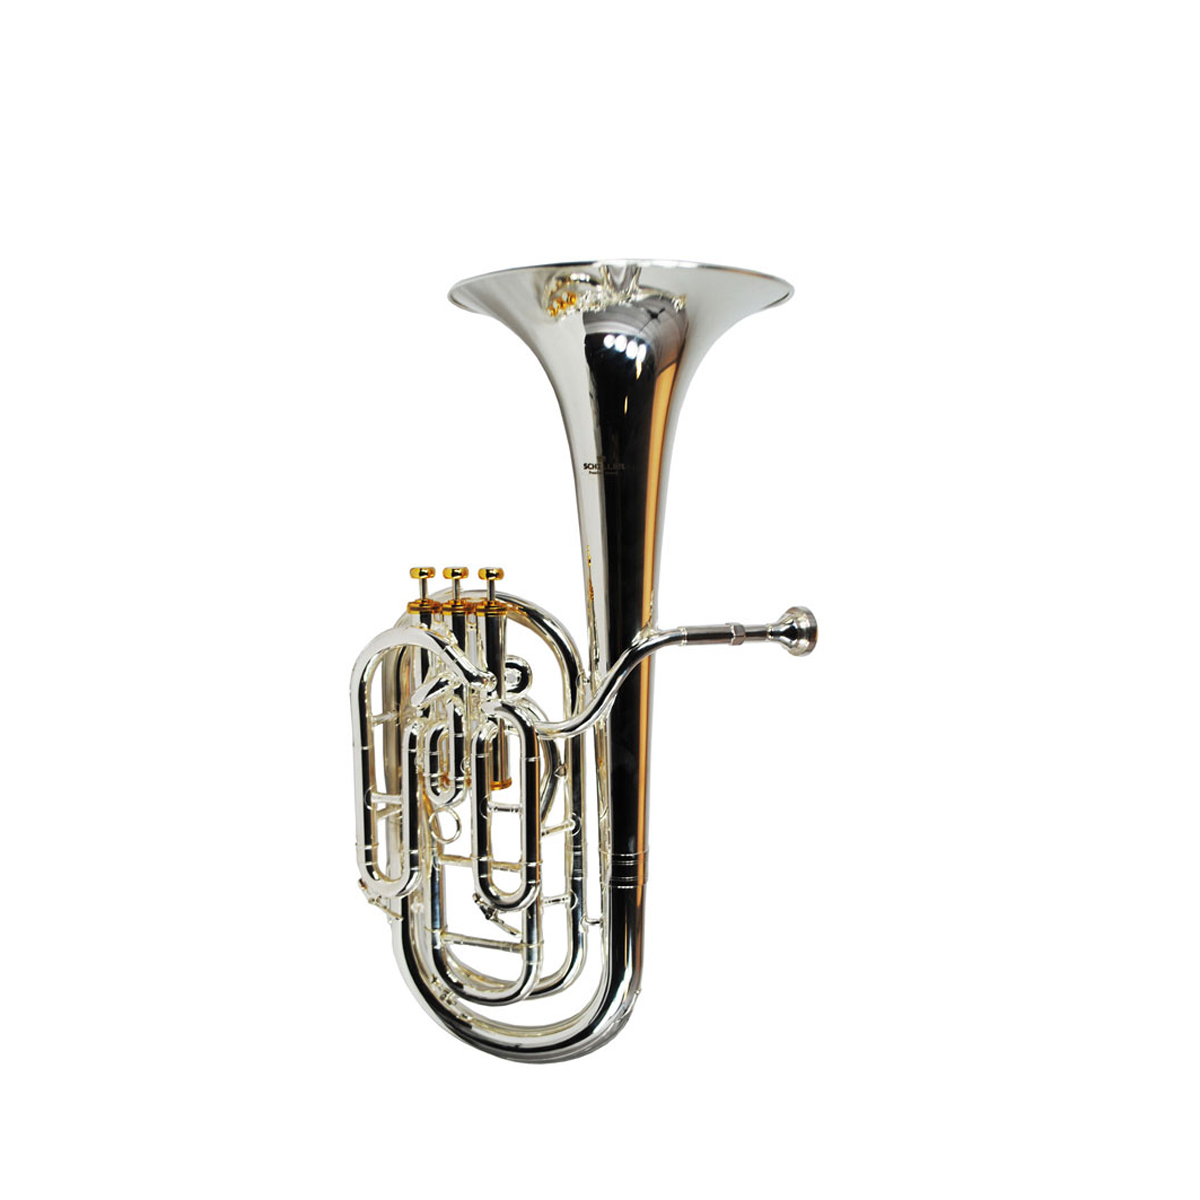 British Band Baritone - Silver Plated with Gold Accents